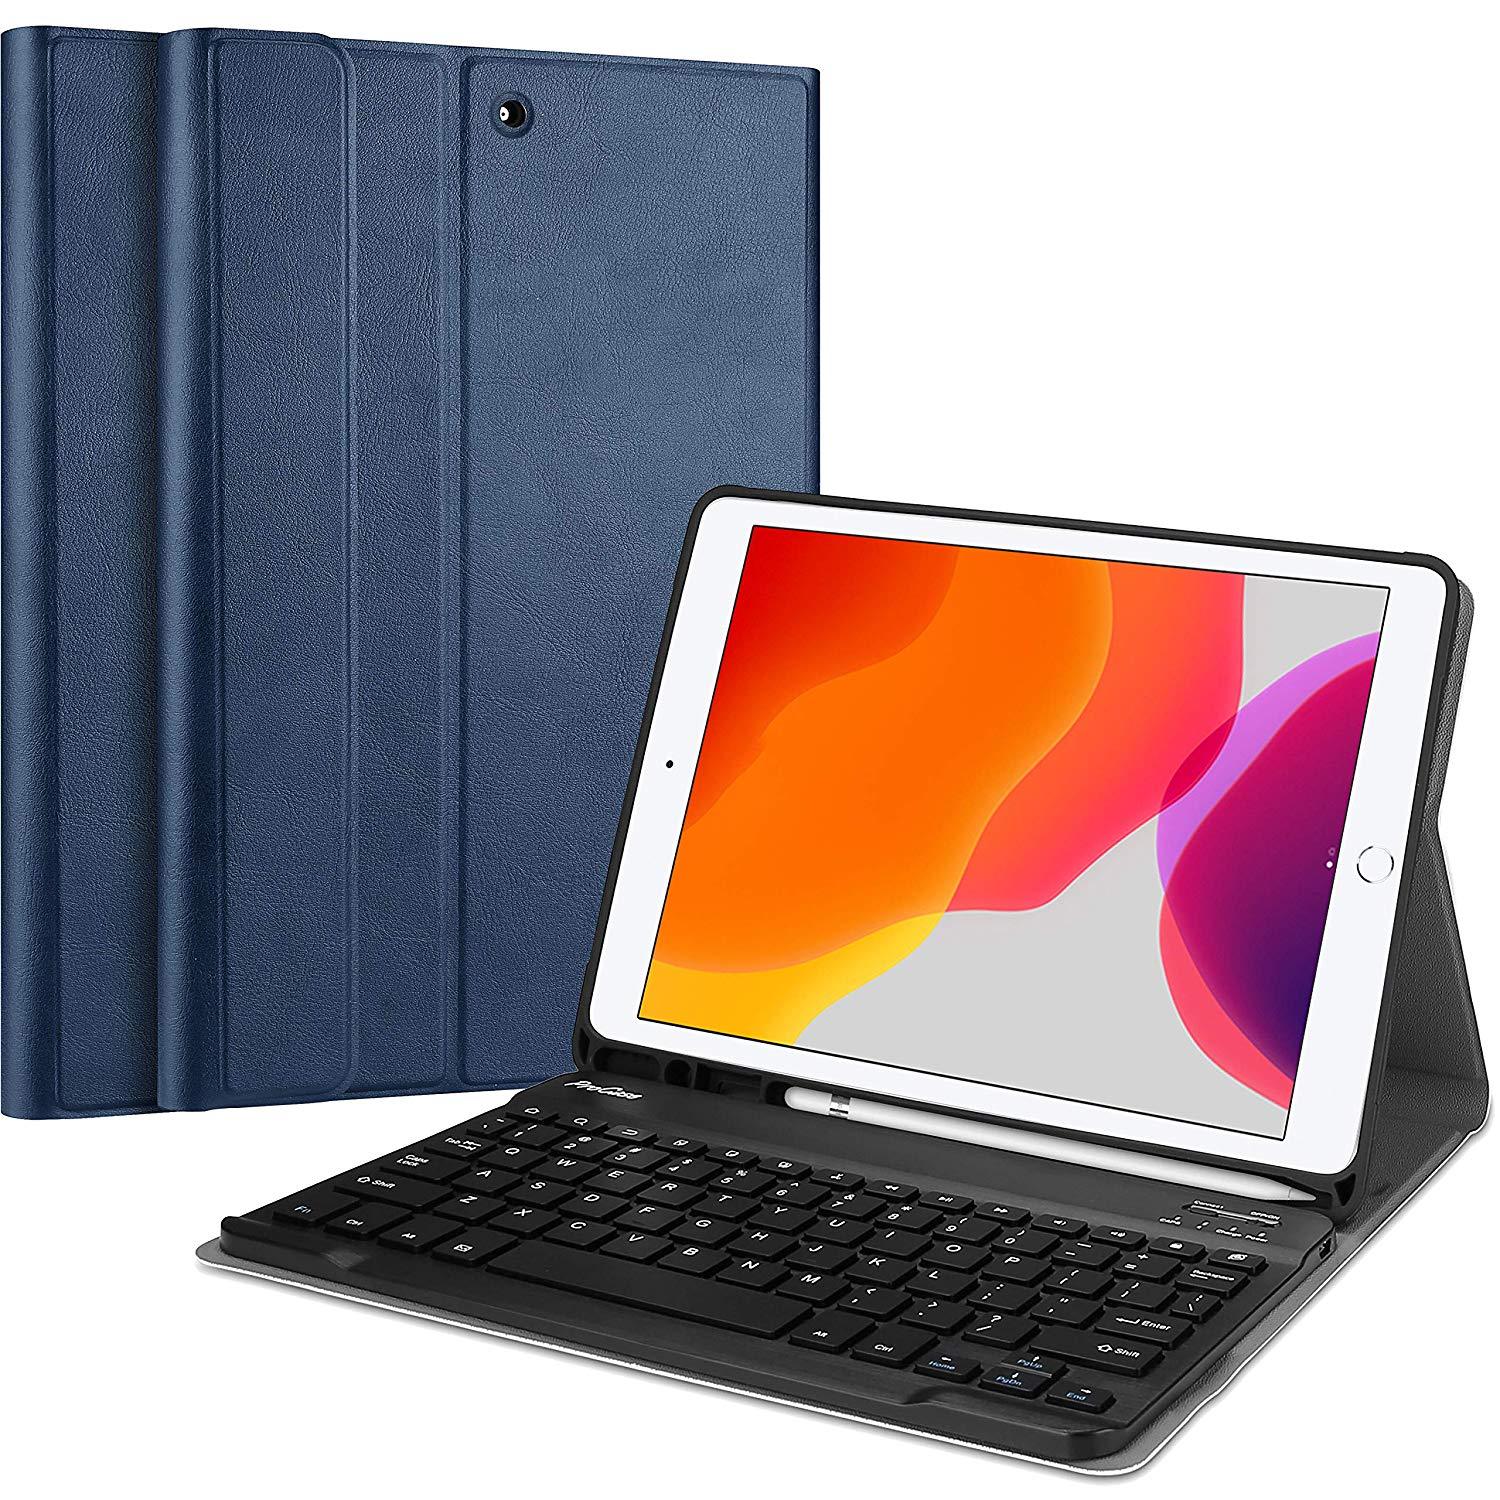 iPad 9th Generation Case 2021, iPad 8th/7th Generation Case 2020/2019 with  Pencil Holder Also Fit iPad Air 3th Gen 2019/iPad Pro 10.5 inch 2017 PU